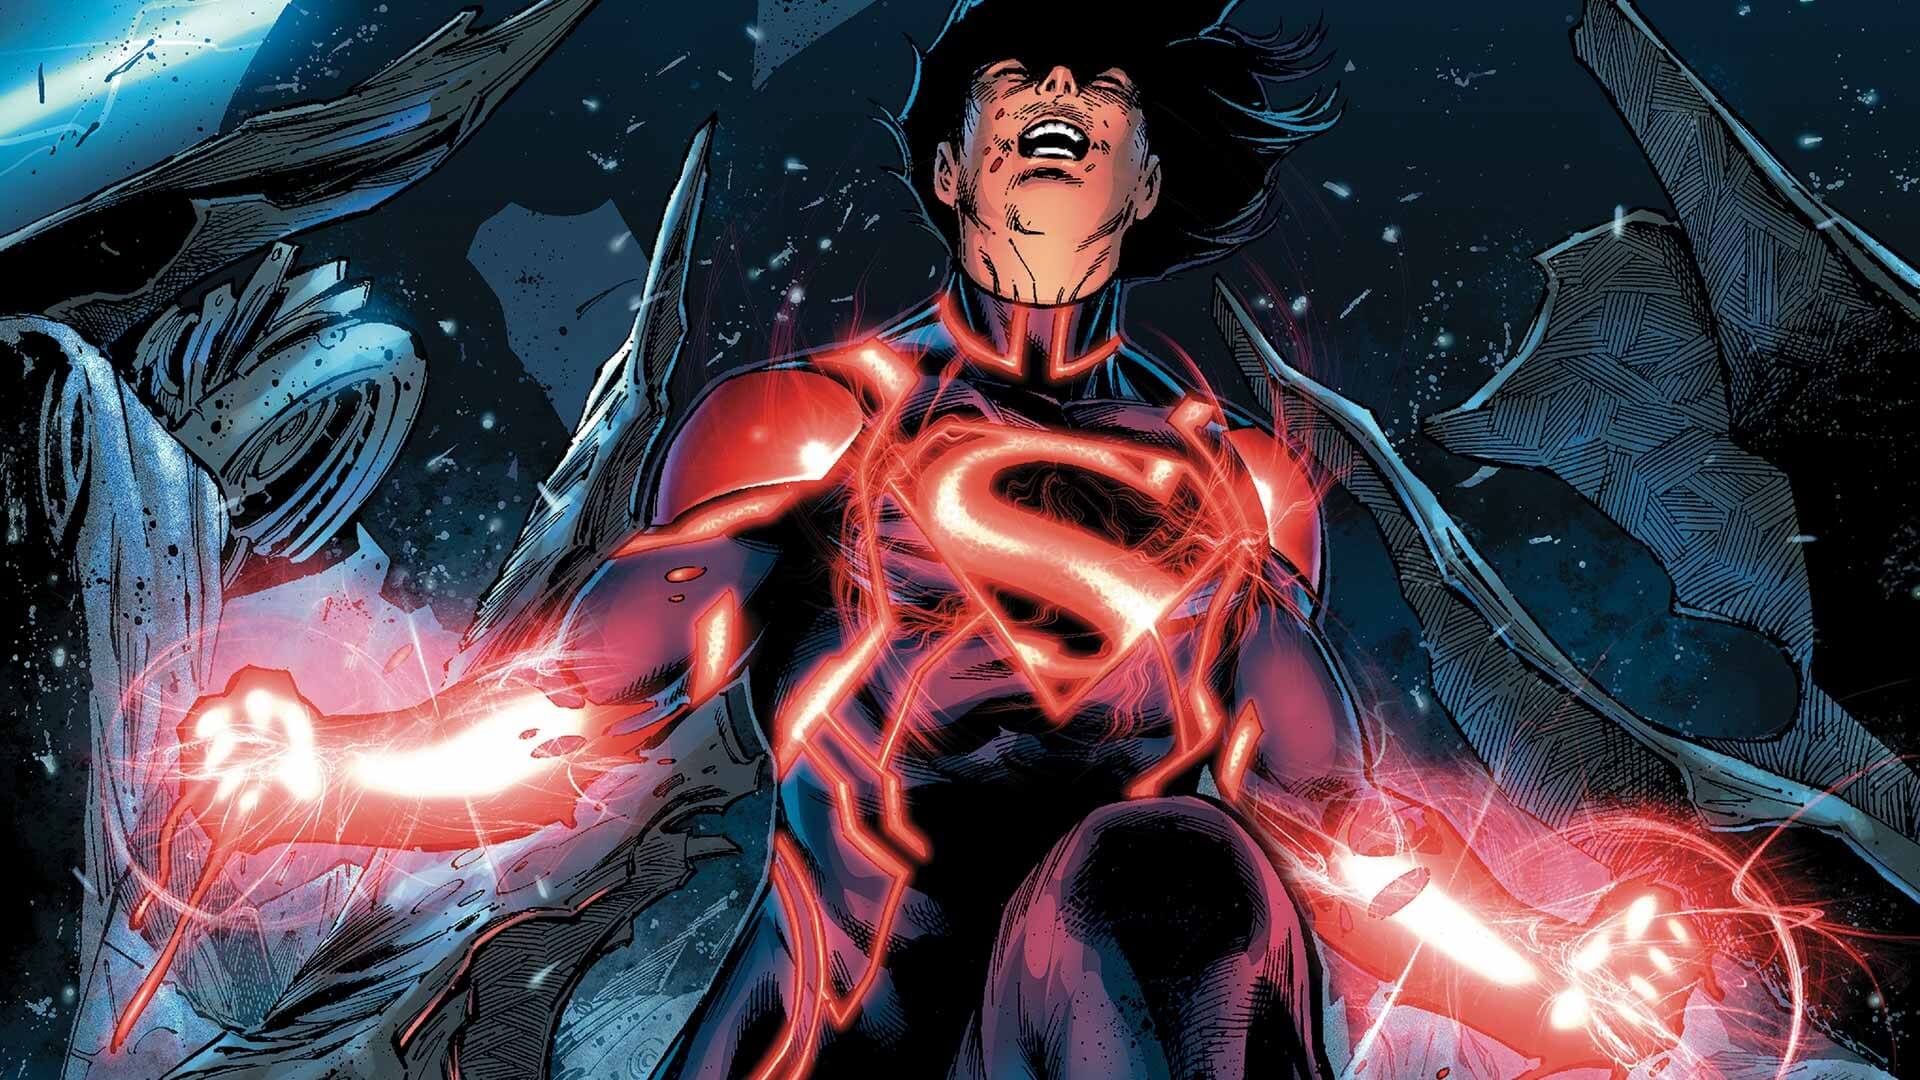 One of the DC variants who is stronger than the original.